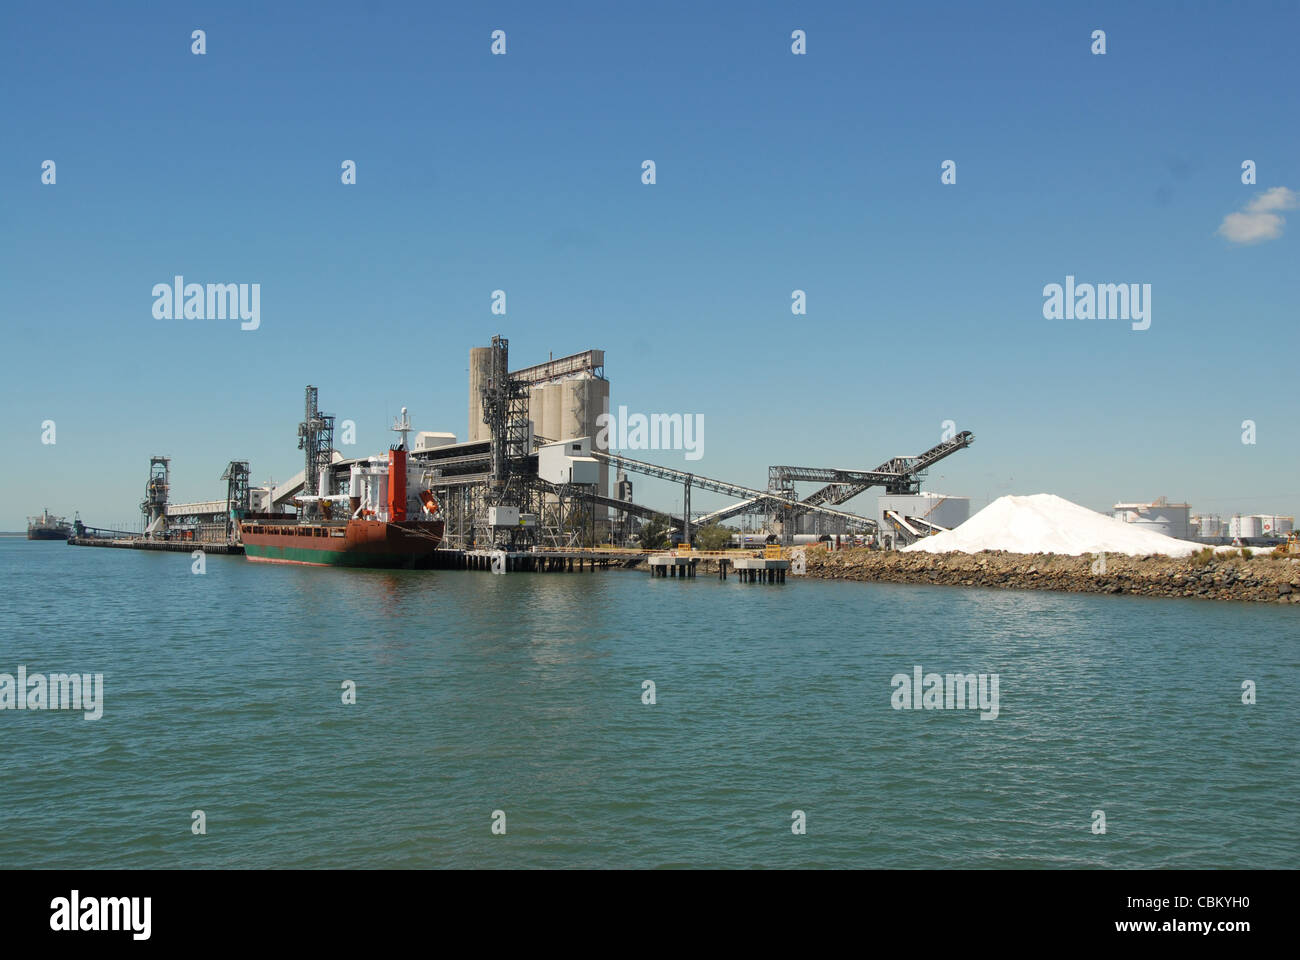 Ship loading at the port of Gladstone in Queensland, Australia Stock Photo